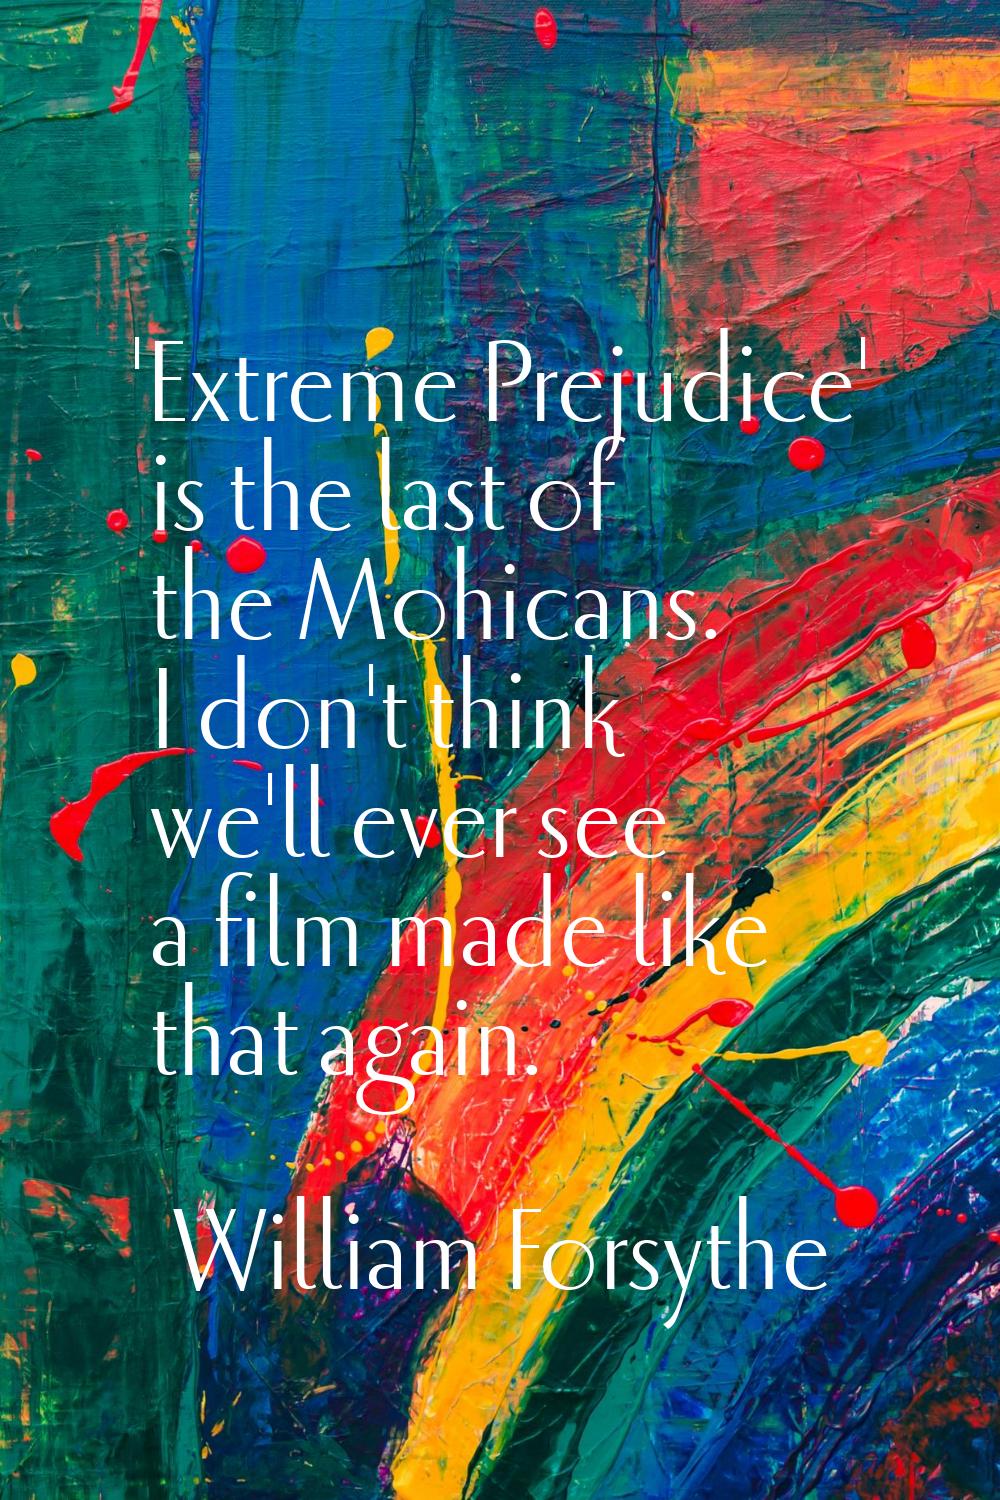 'Extreme Prejudice' is the last of the Mohicans. I don't think we'll ever see a film made like that